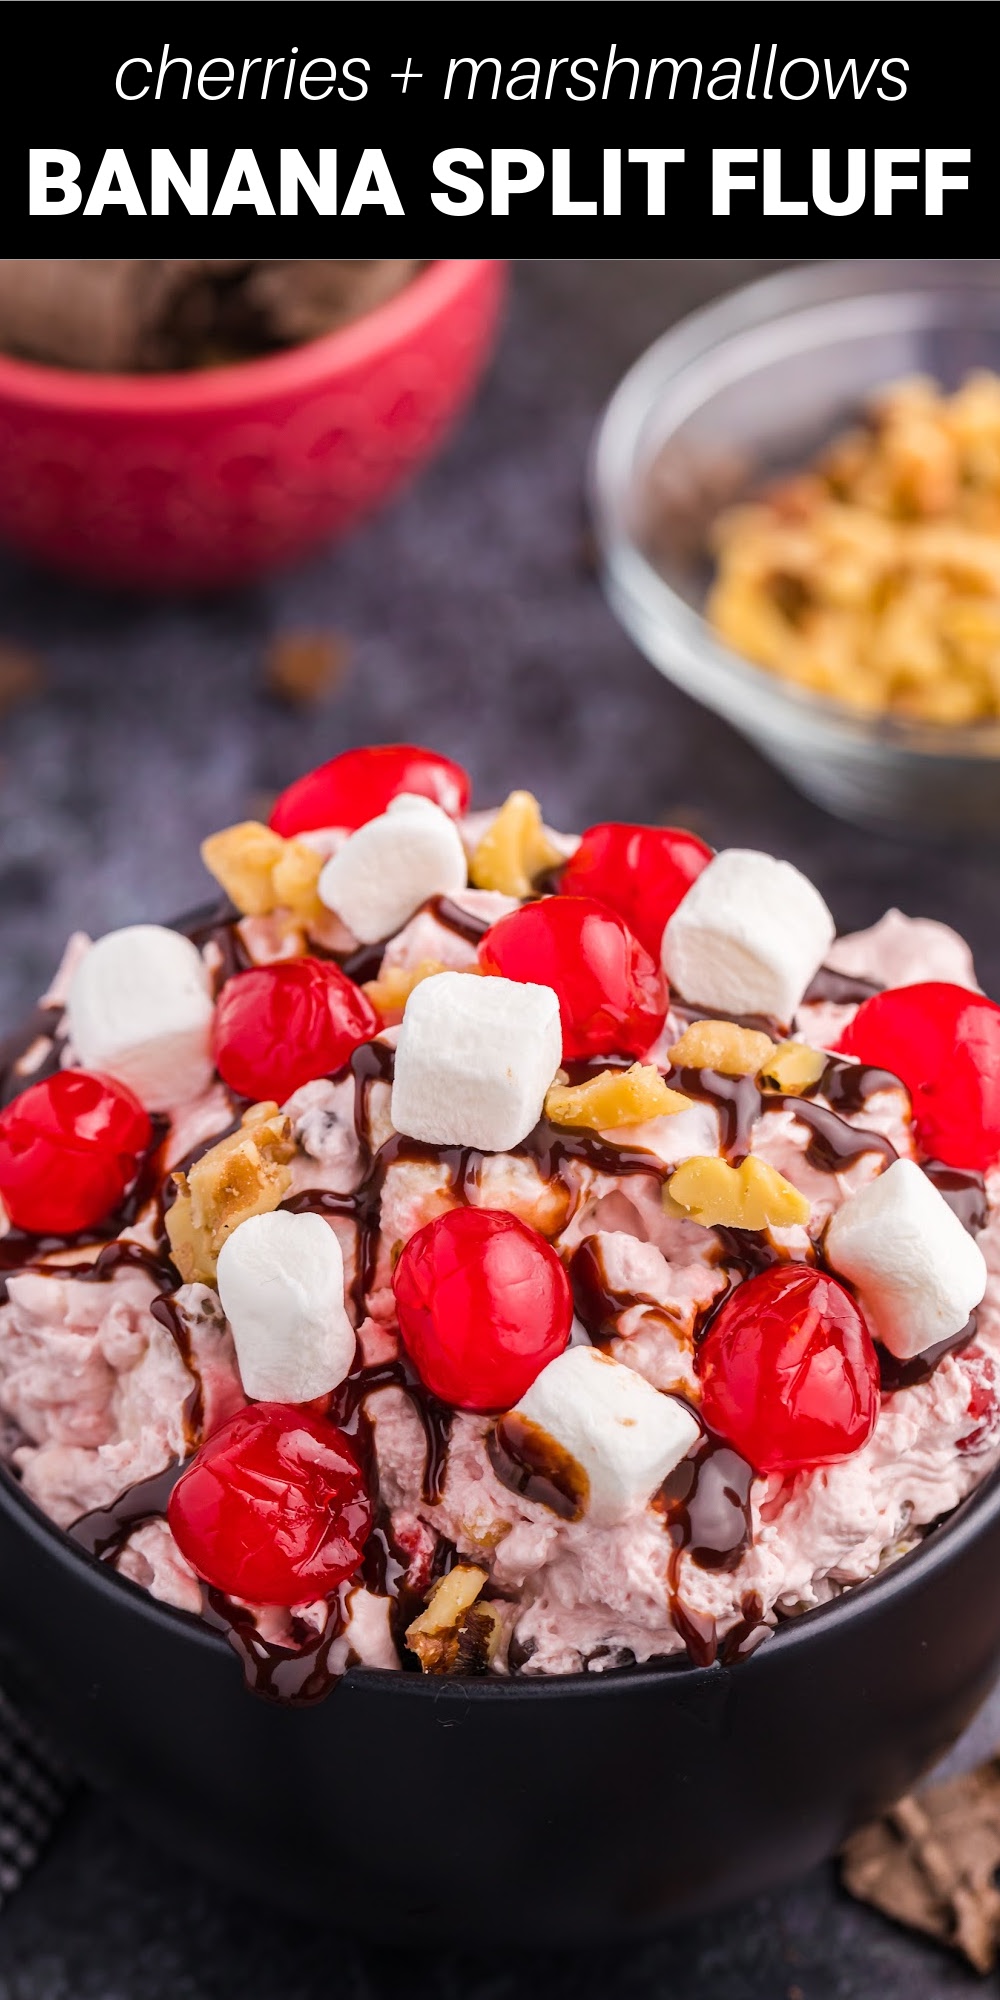 This yummy Banana Split Fluff salad is an easy dump and go, no bake dessert recipe that only takes 5 minutes and a handful of ingredients to make. It’s loaded with all the flavors of your favorite banana split toppings, but in a light and fluffy salad your whole family will love!